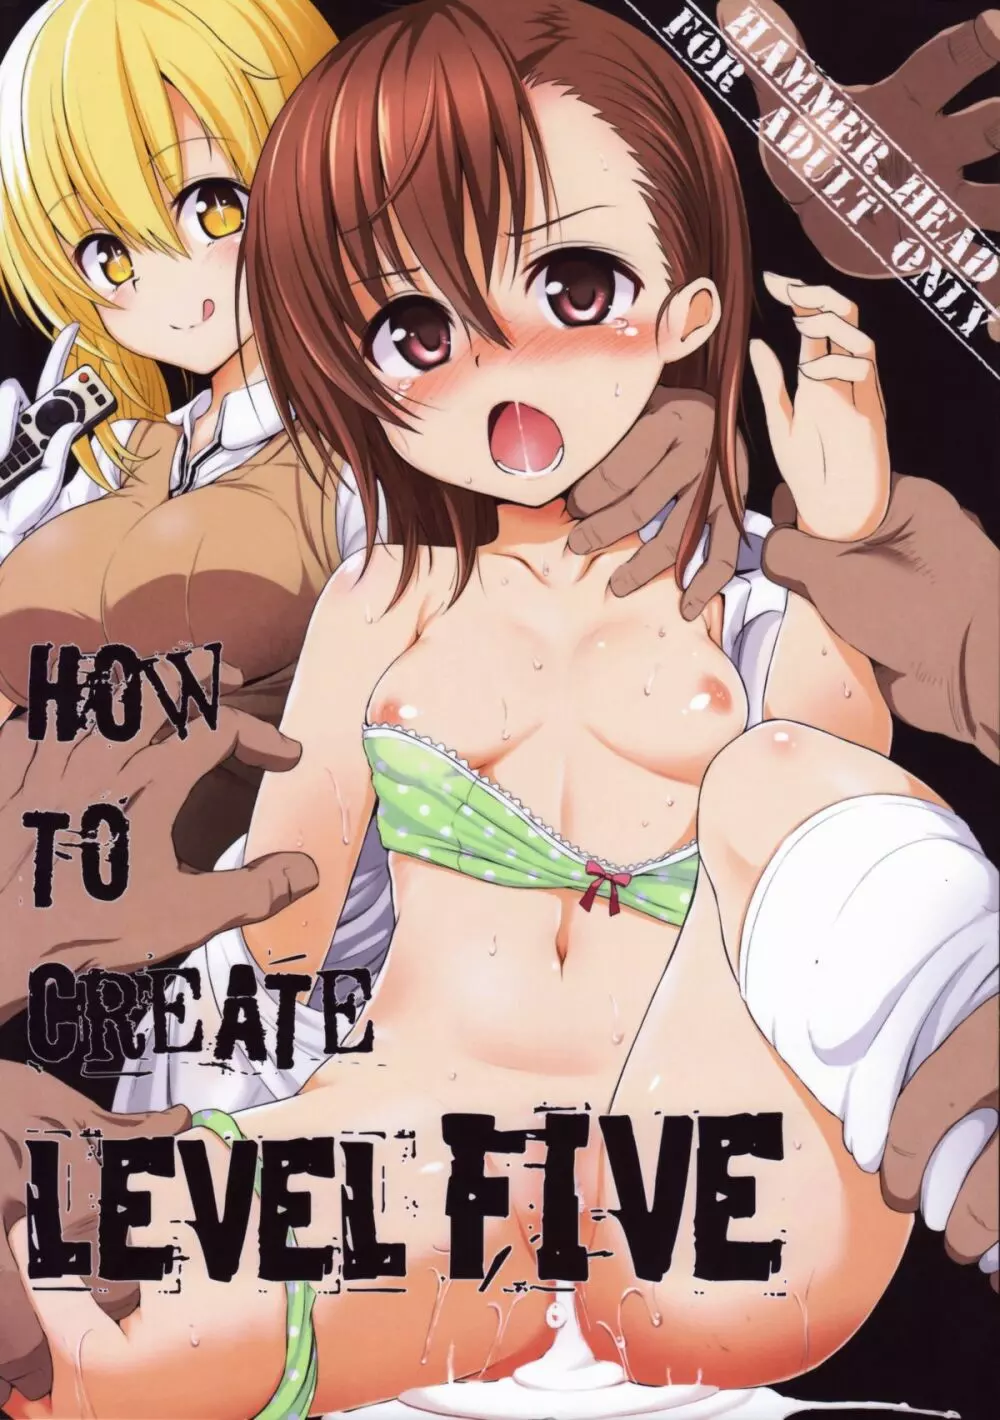 HOW TO CREATE LEVEL FIVE